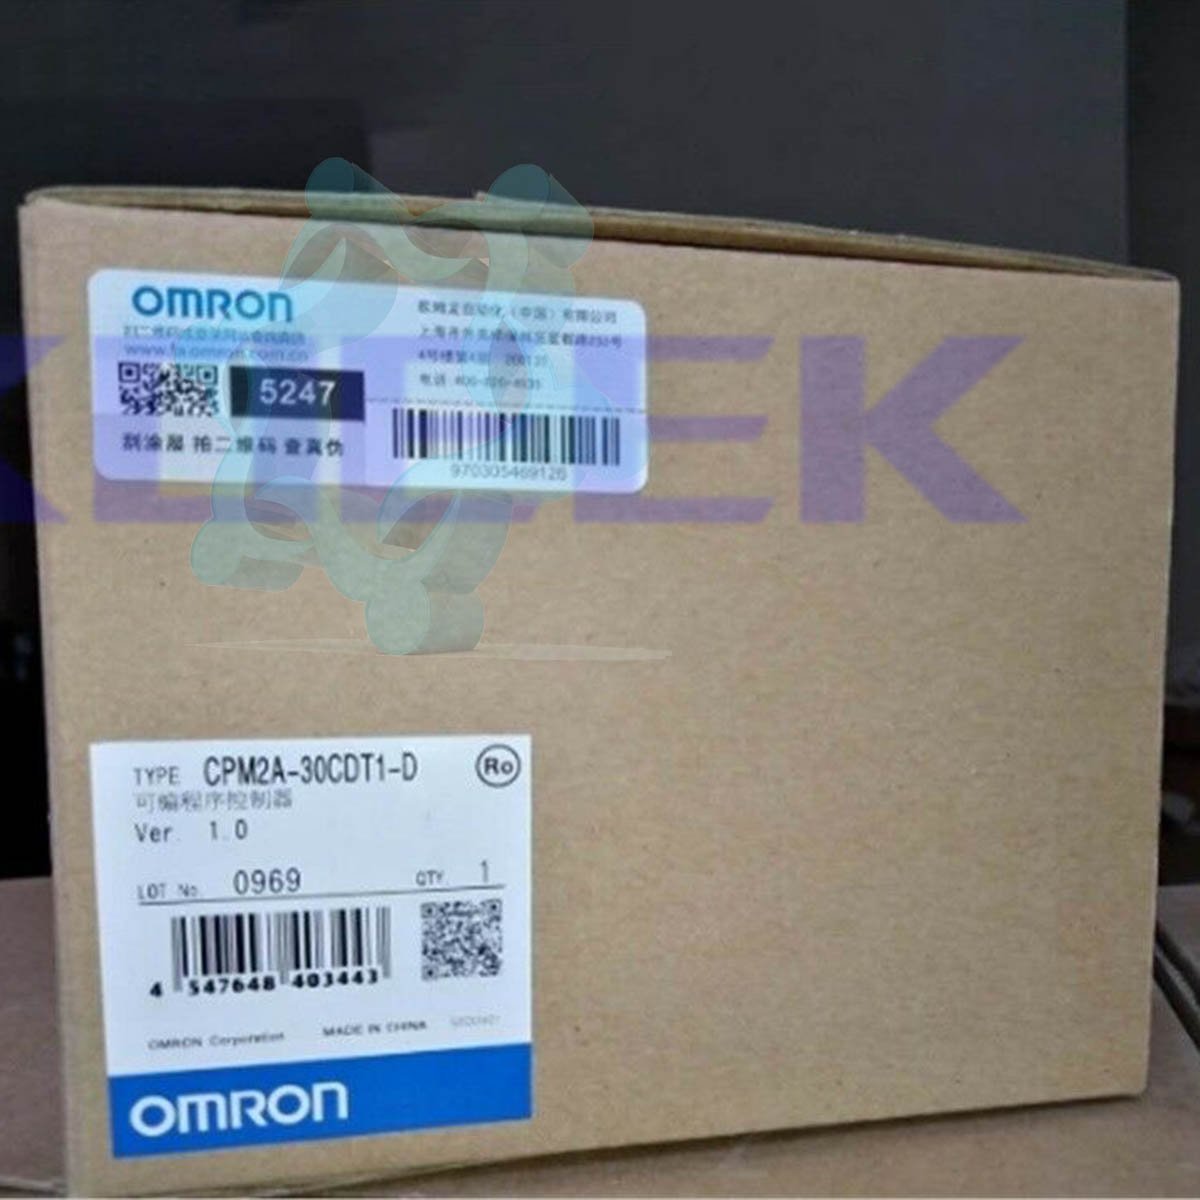 CPM2A-30CDT1-D KOEED 500+, 80%, import_2020_10_10_031751, Omron, Other